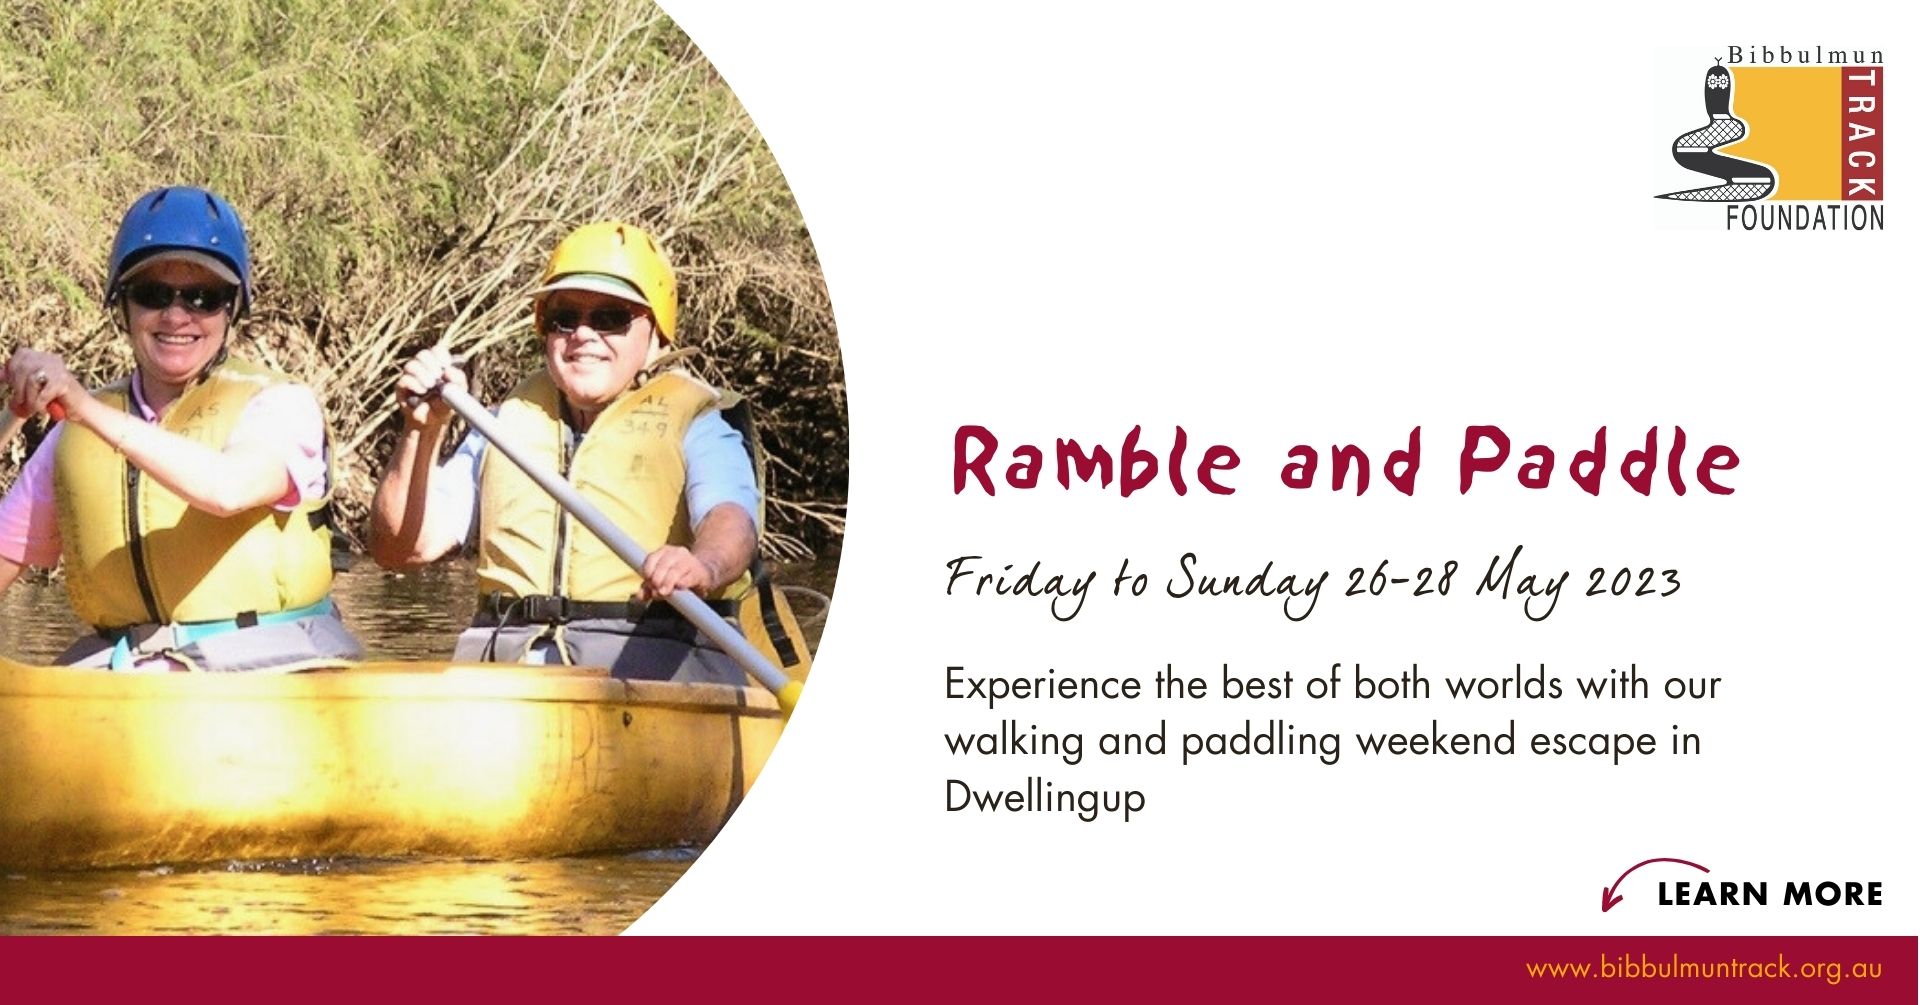 Ramble and Paddle Guided Tour with Bibbulmun Track Foundation